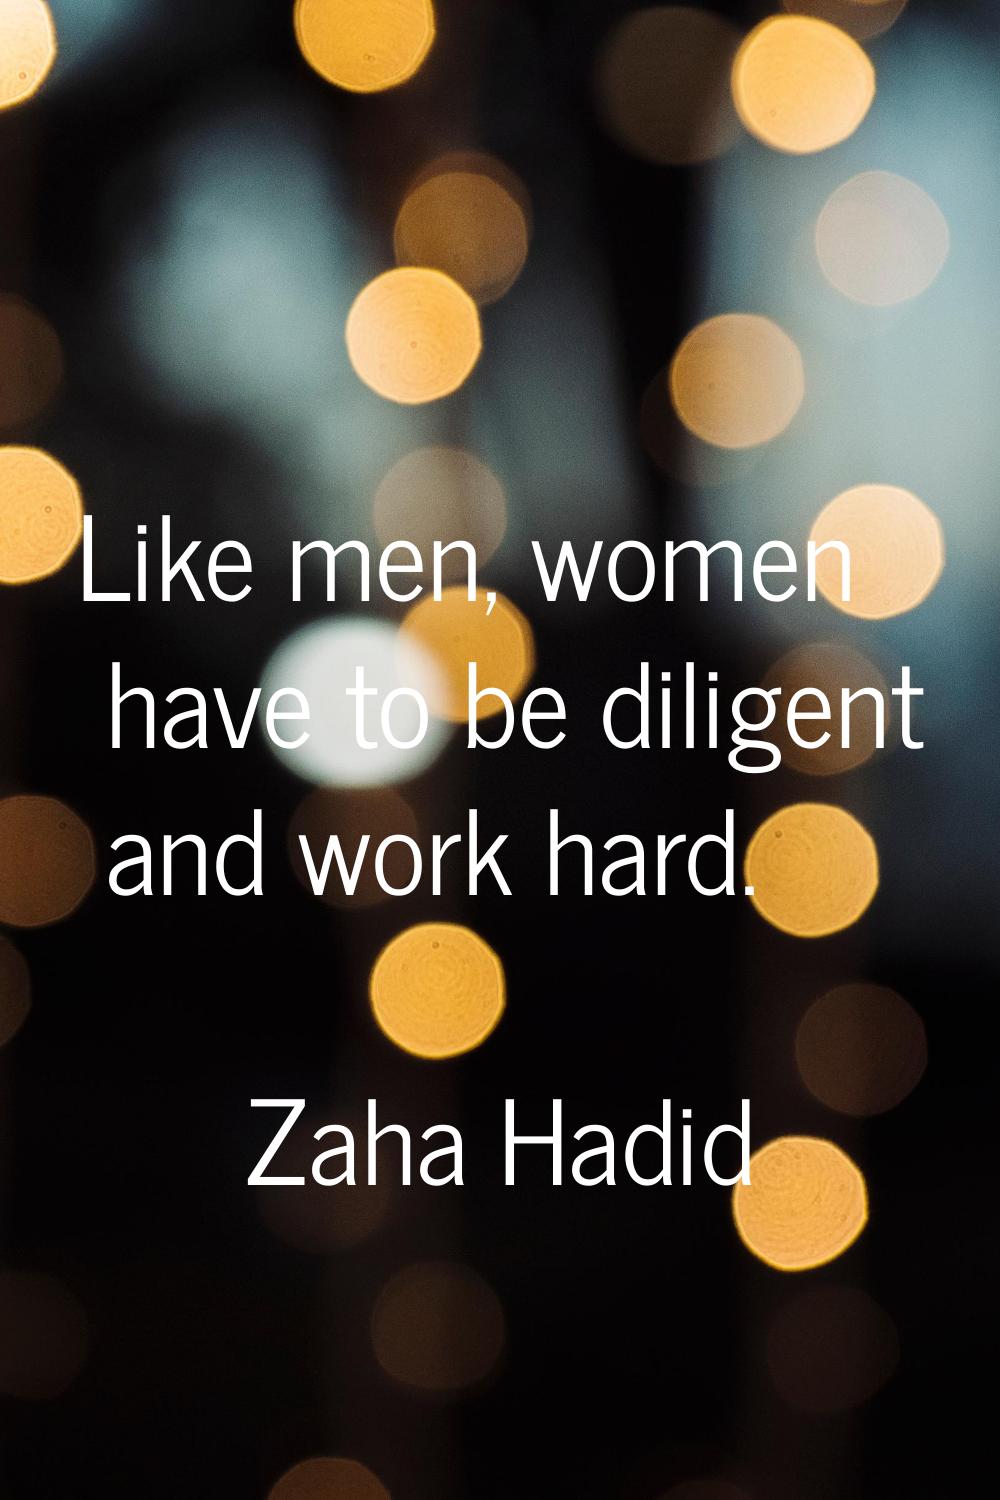 Like men, women have to be diligent and work hard.